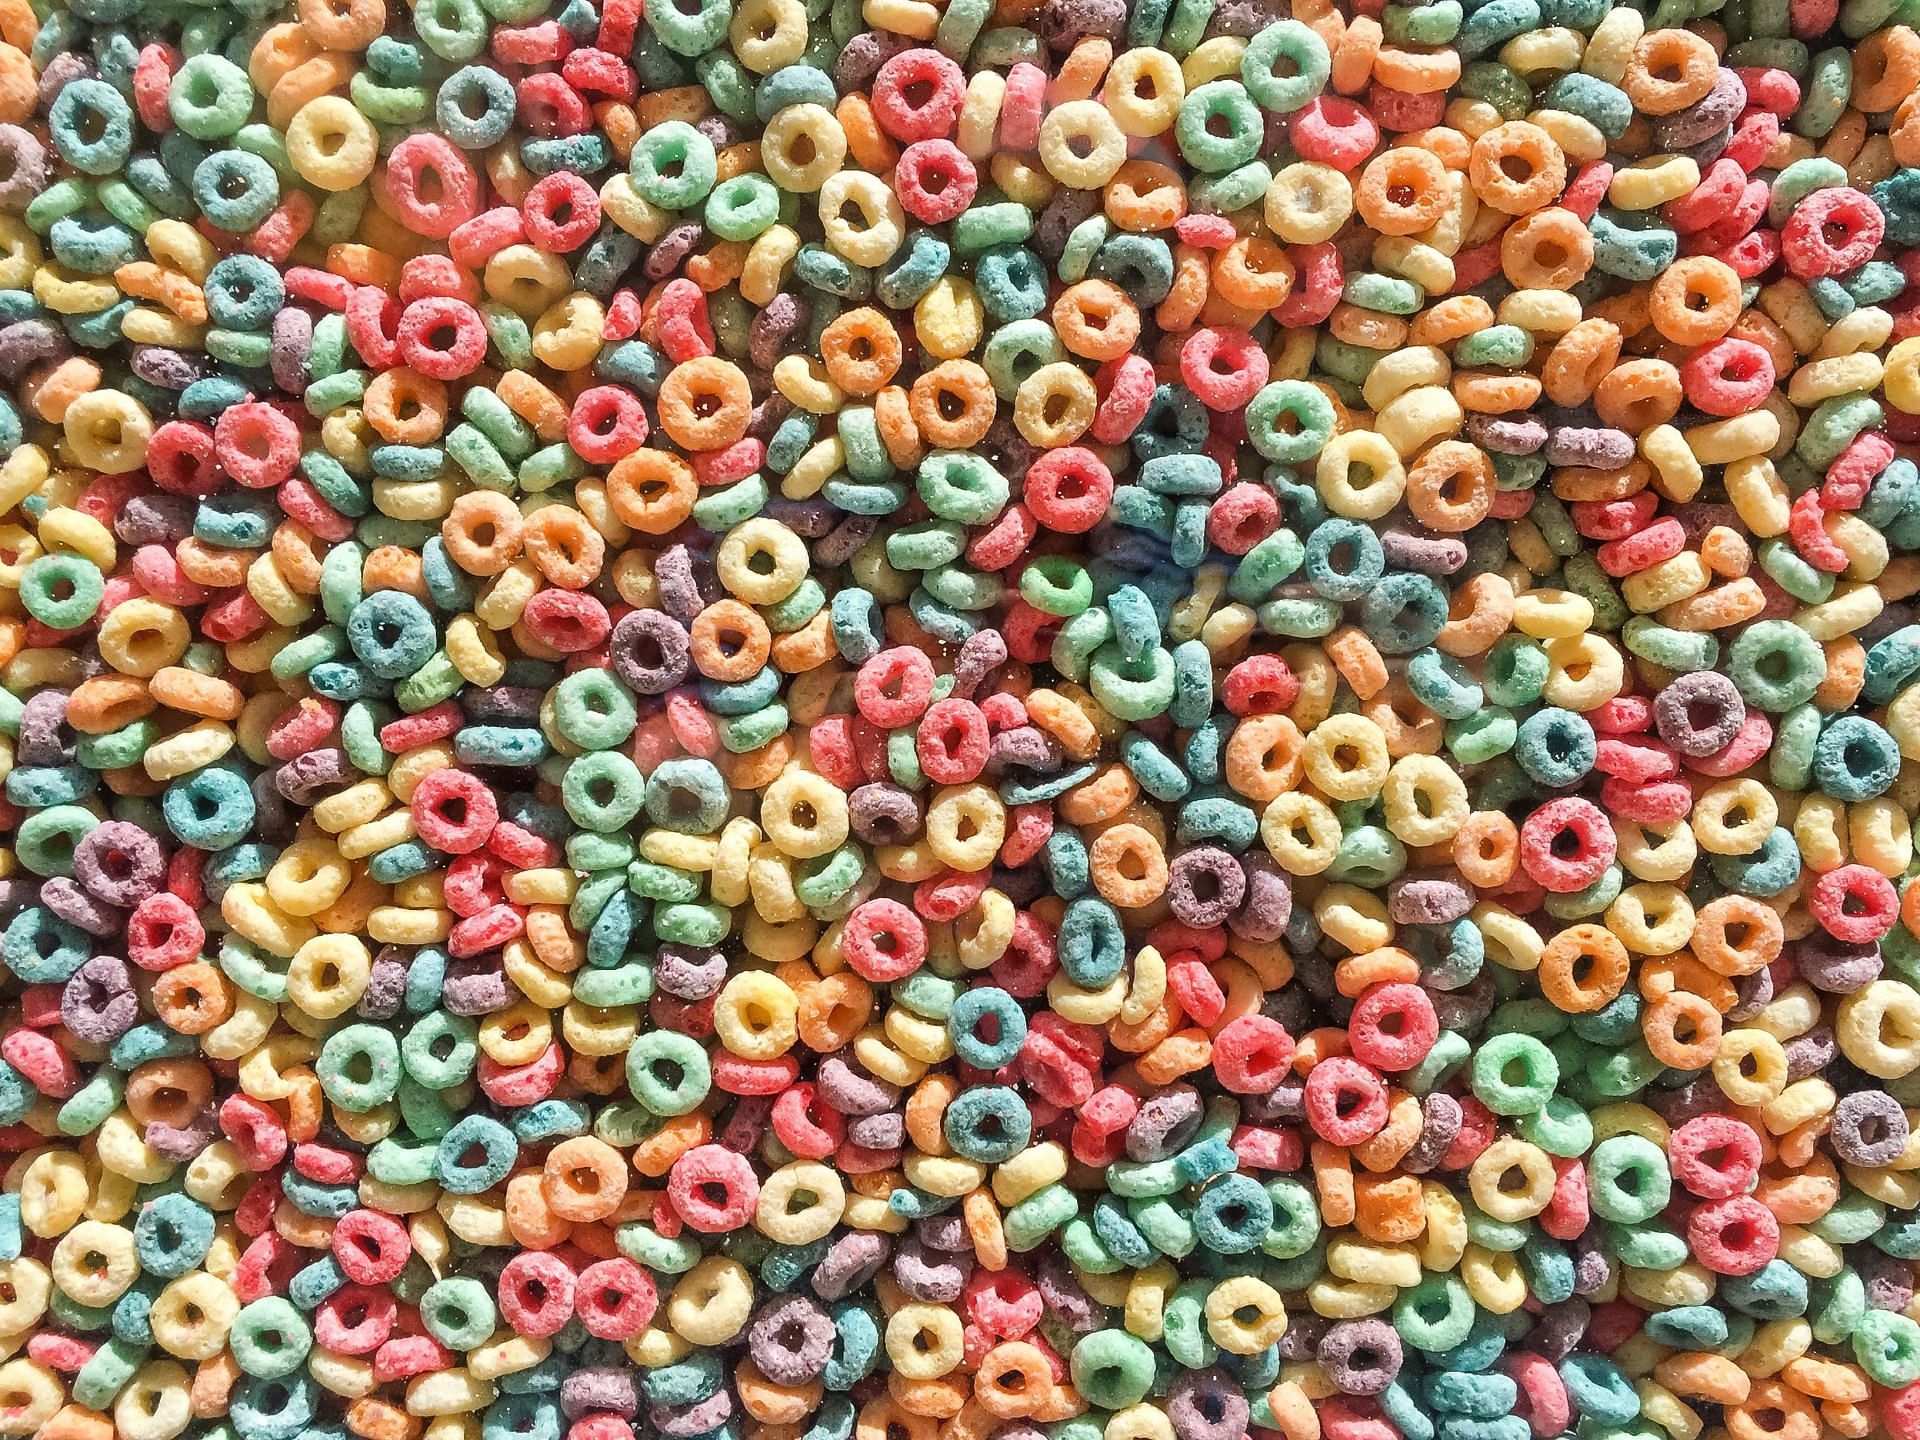 Cereals contain added sugars. (Image via Unsplash/Etienne Girardet)